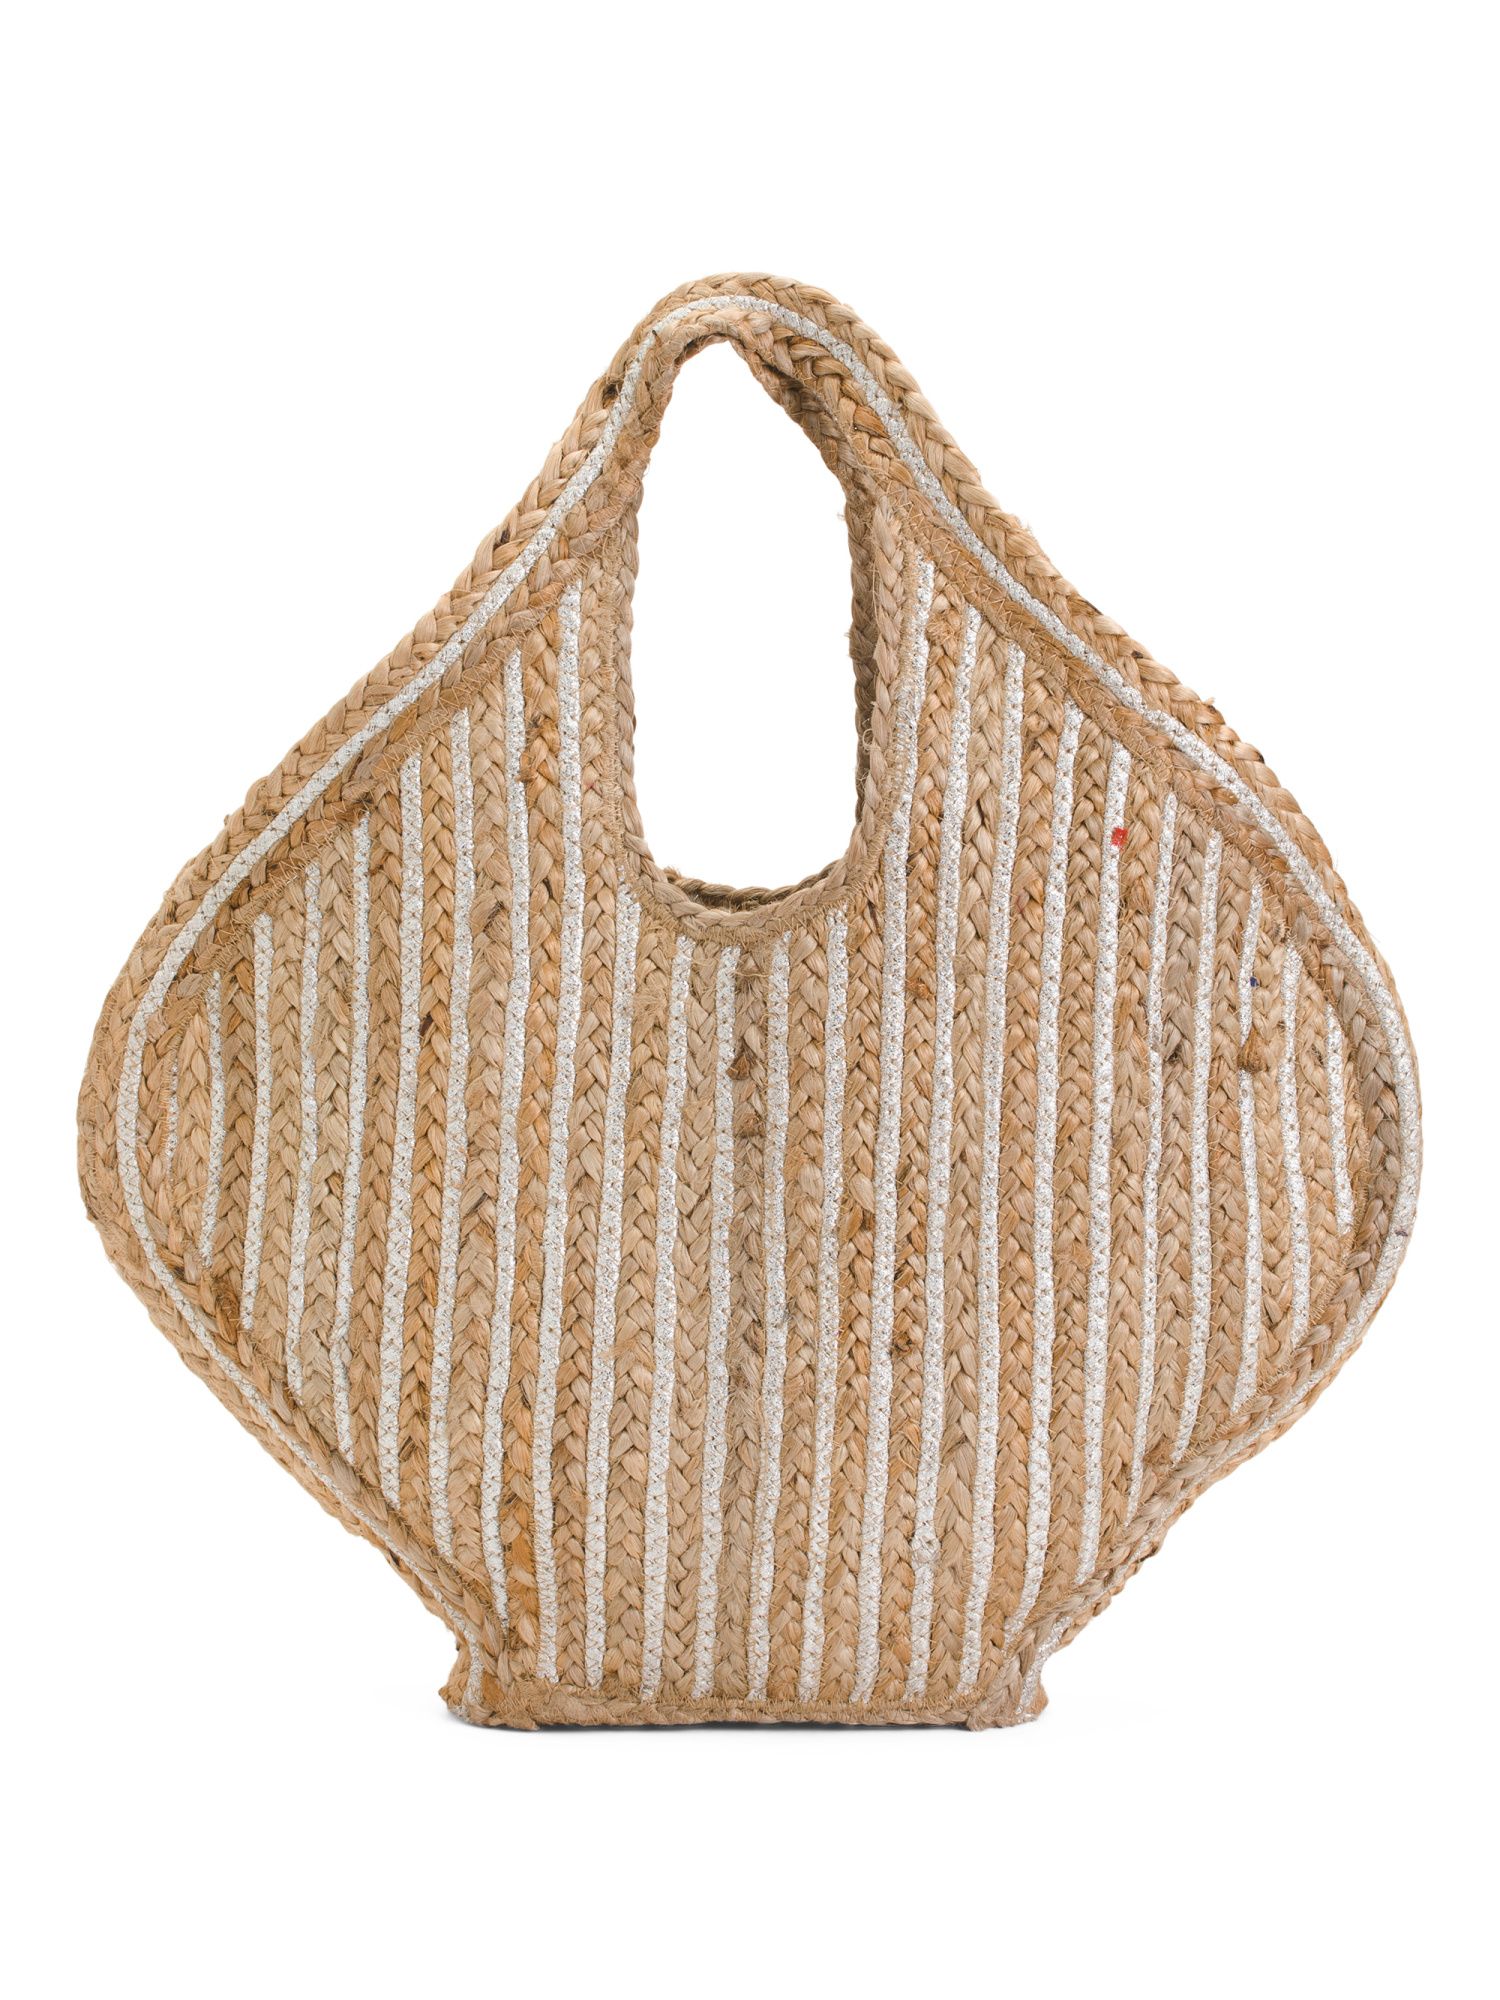 Spring Jute Stripe Tote With Top Handles | TJ Maxx